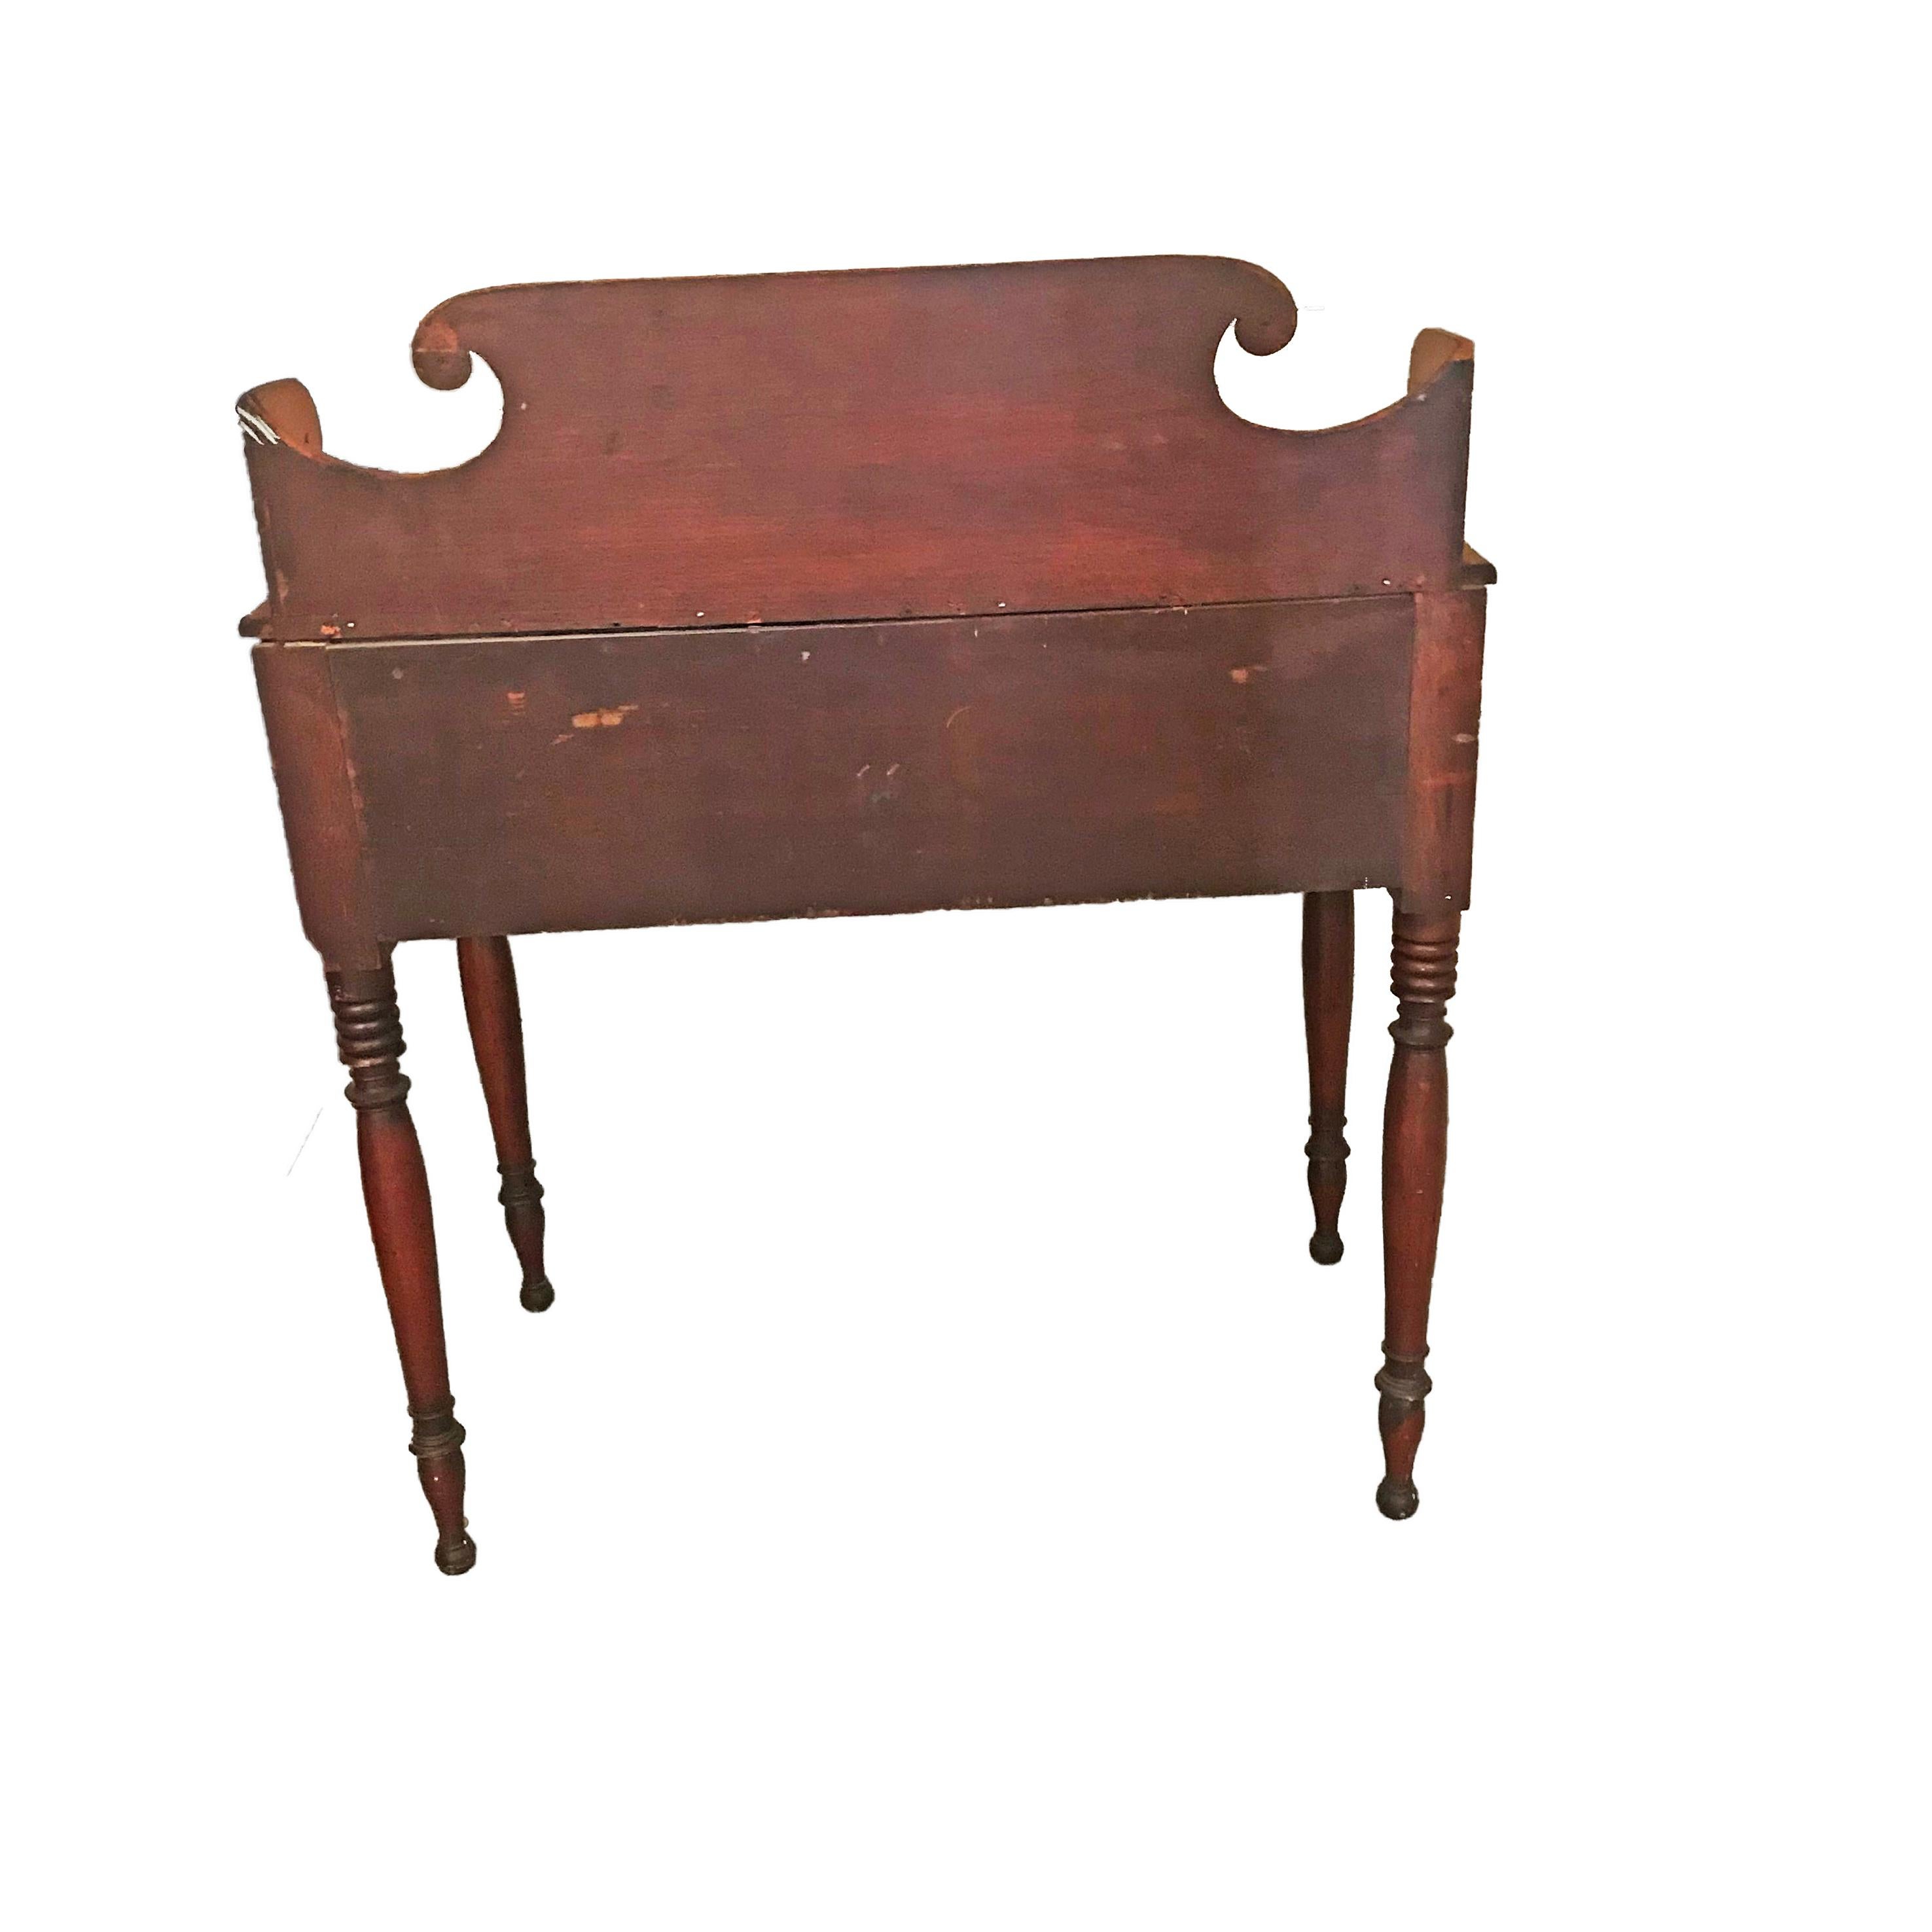 19th Century Diminutive Antique Mahogany Serving Table For Sale